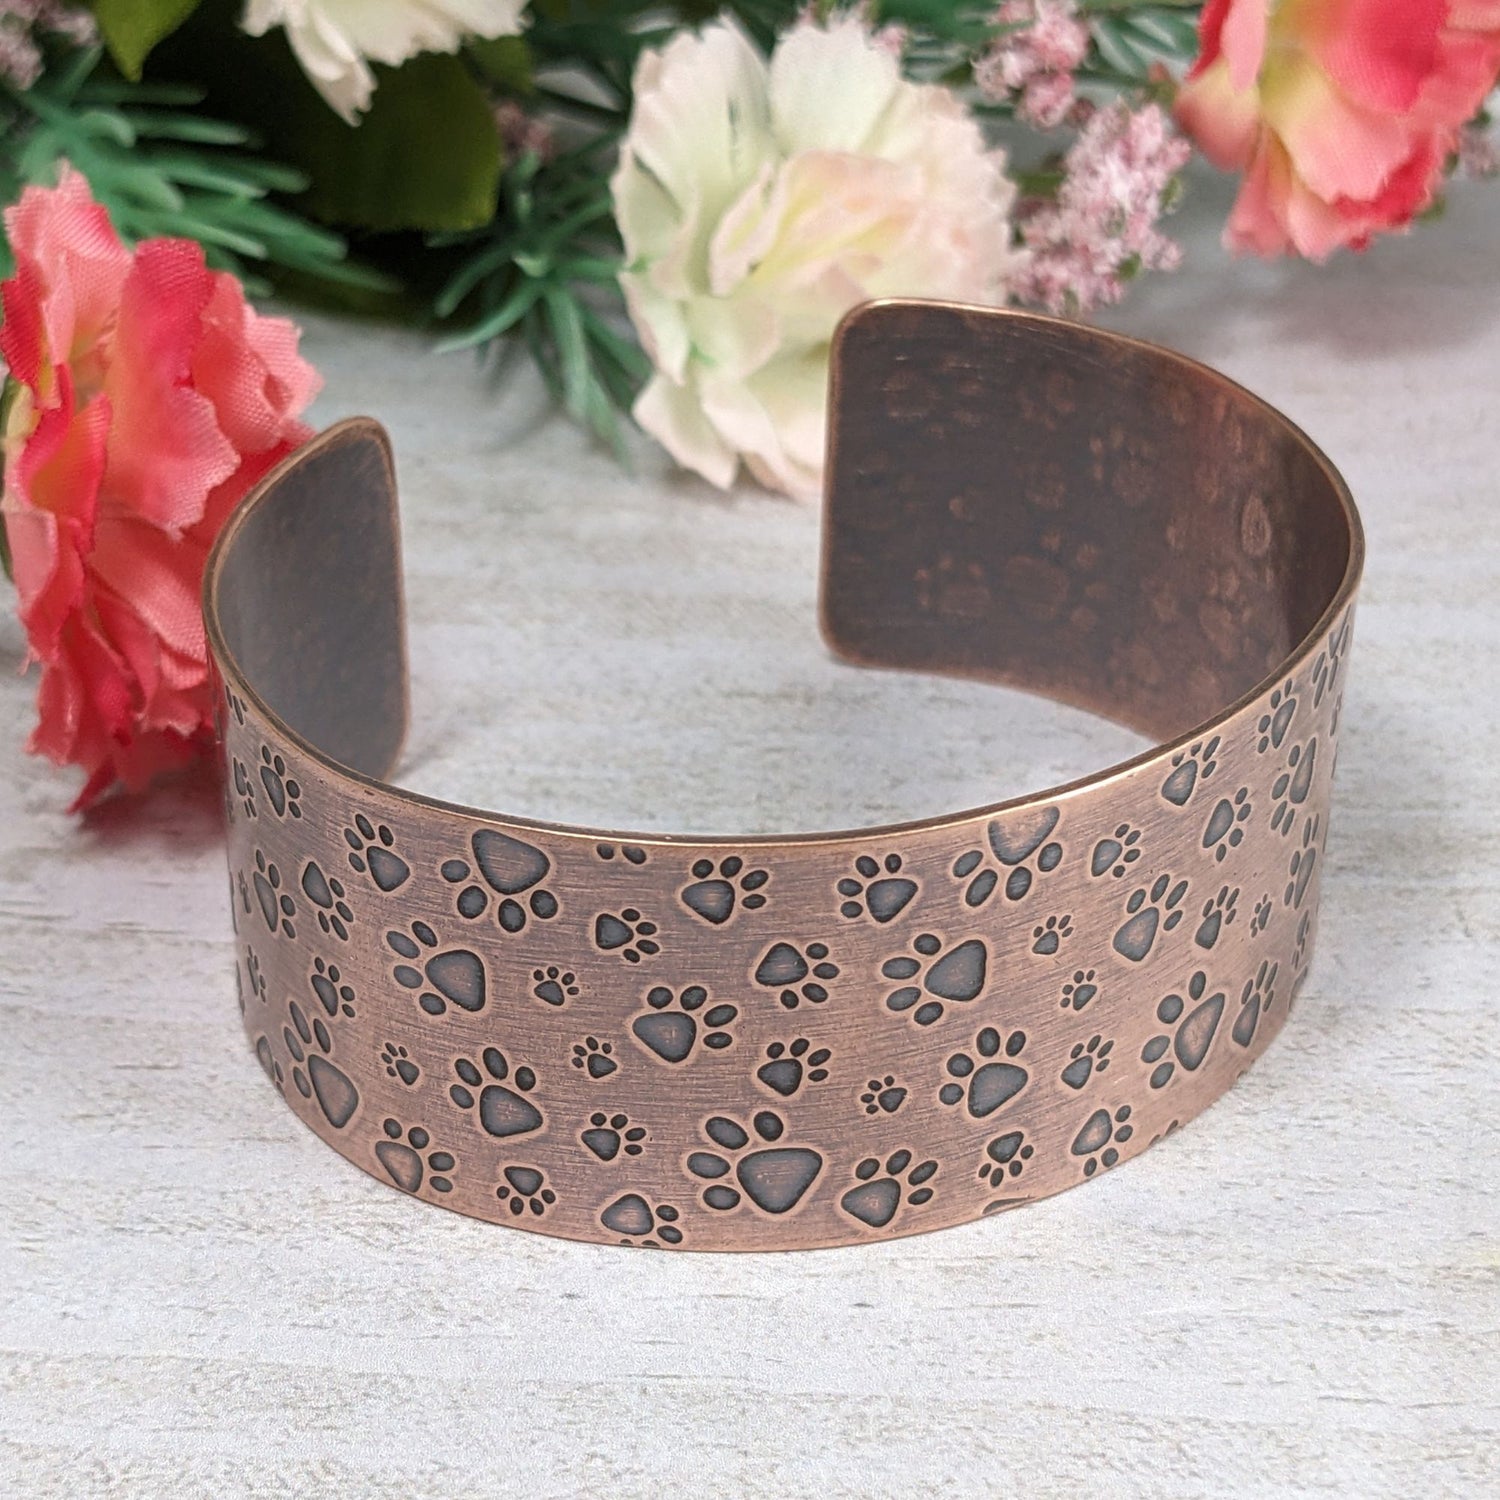 Copper cuff bracelet covered in a dog paw print design. The paw prints are in various sizes.